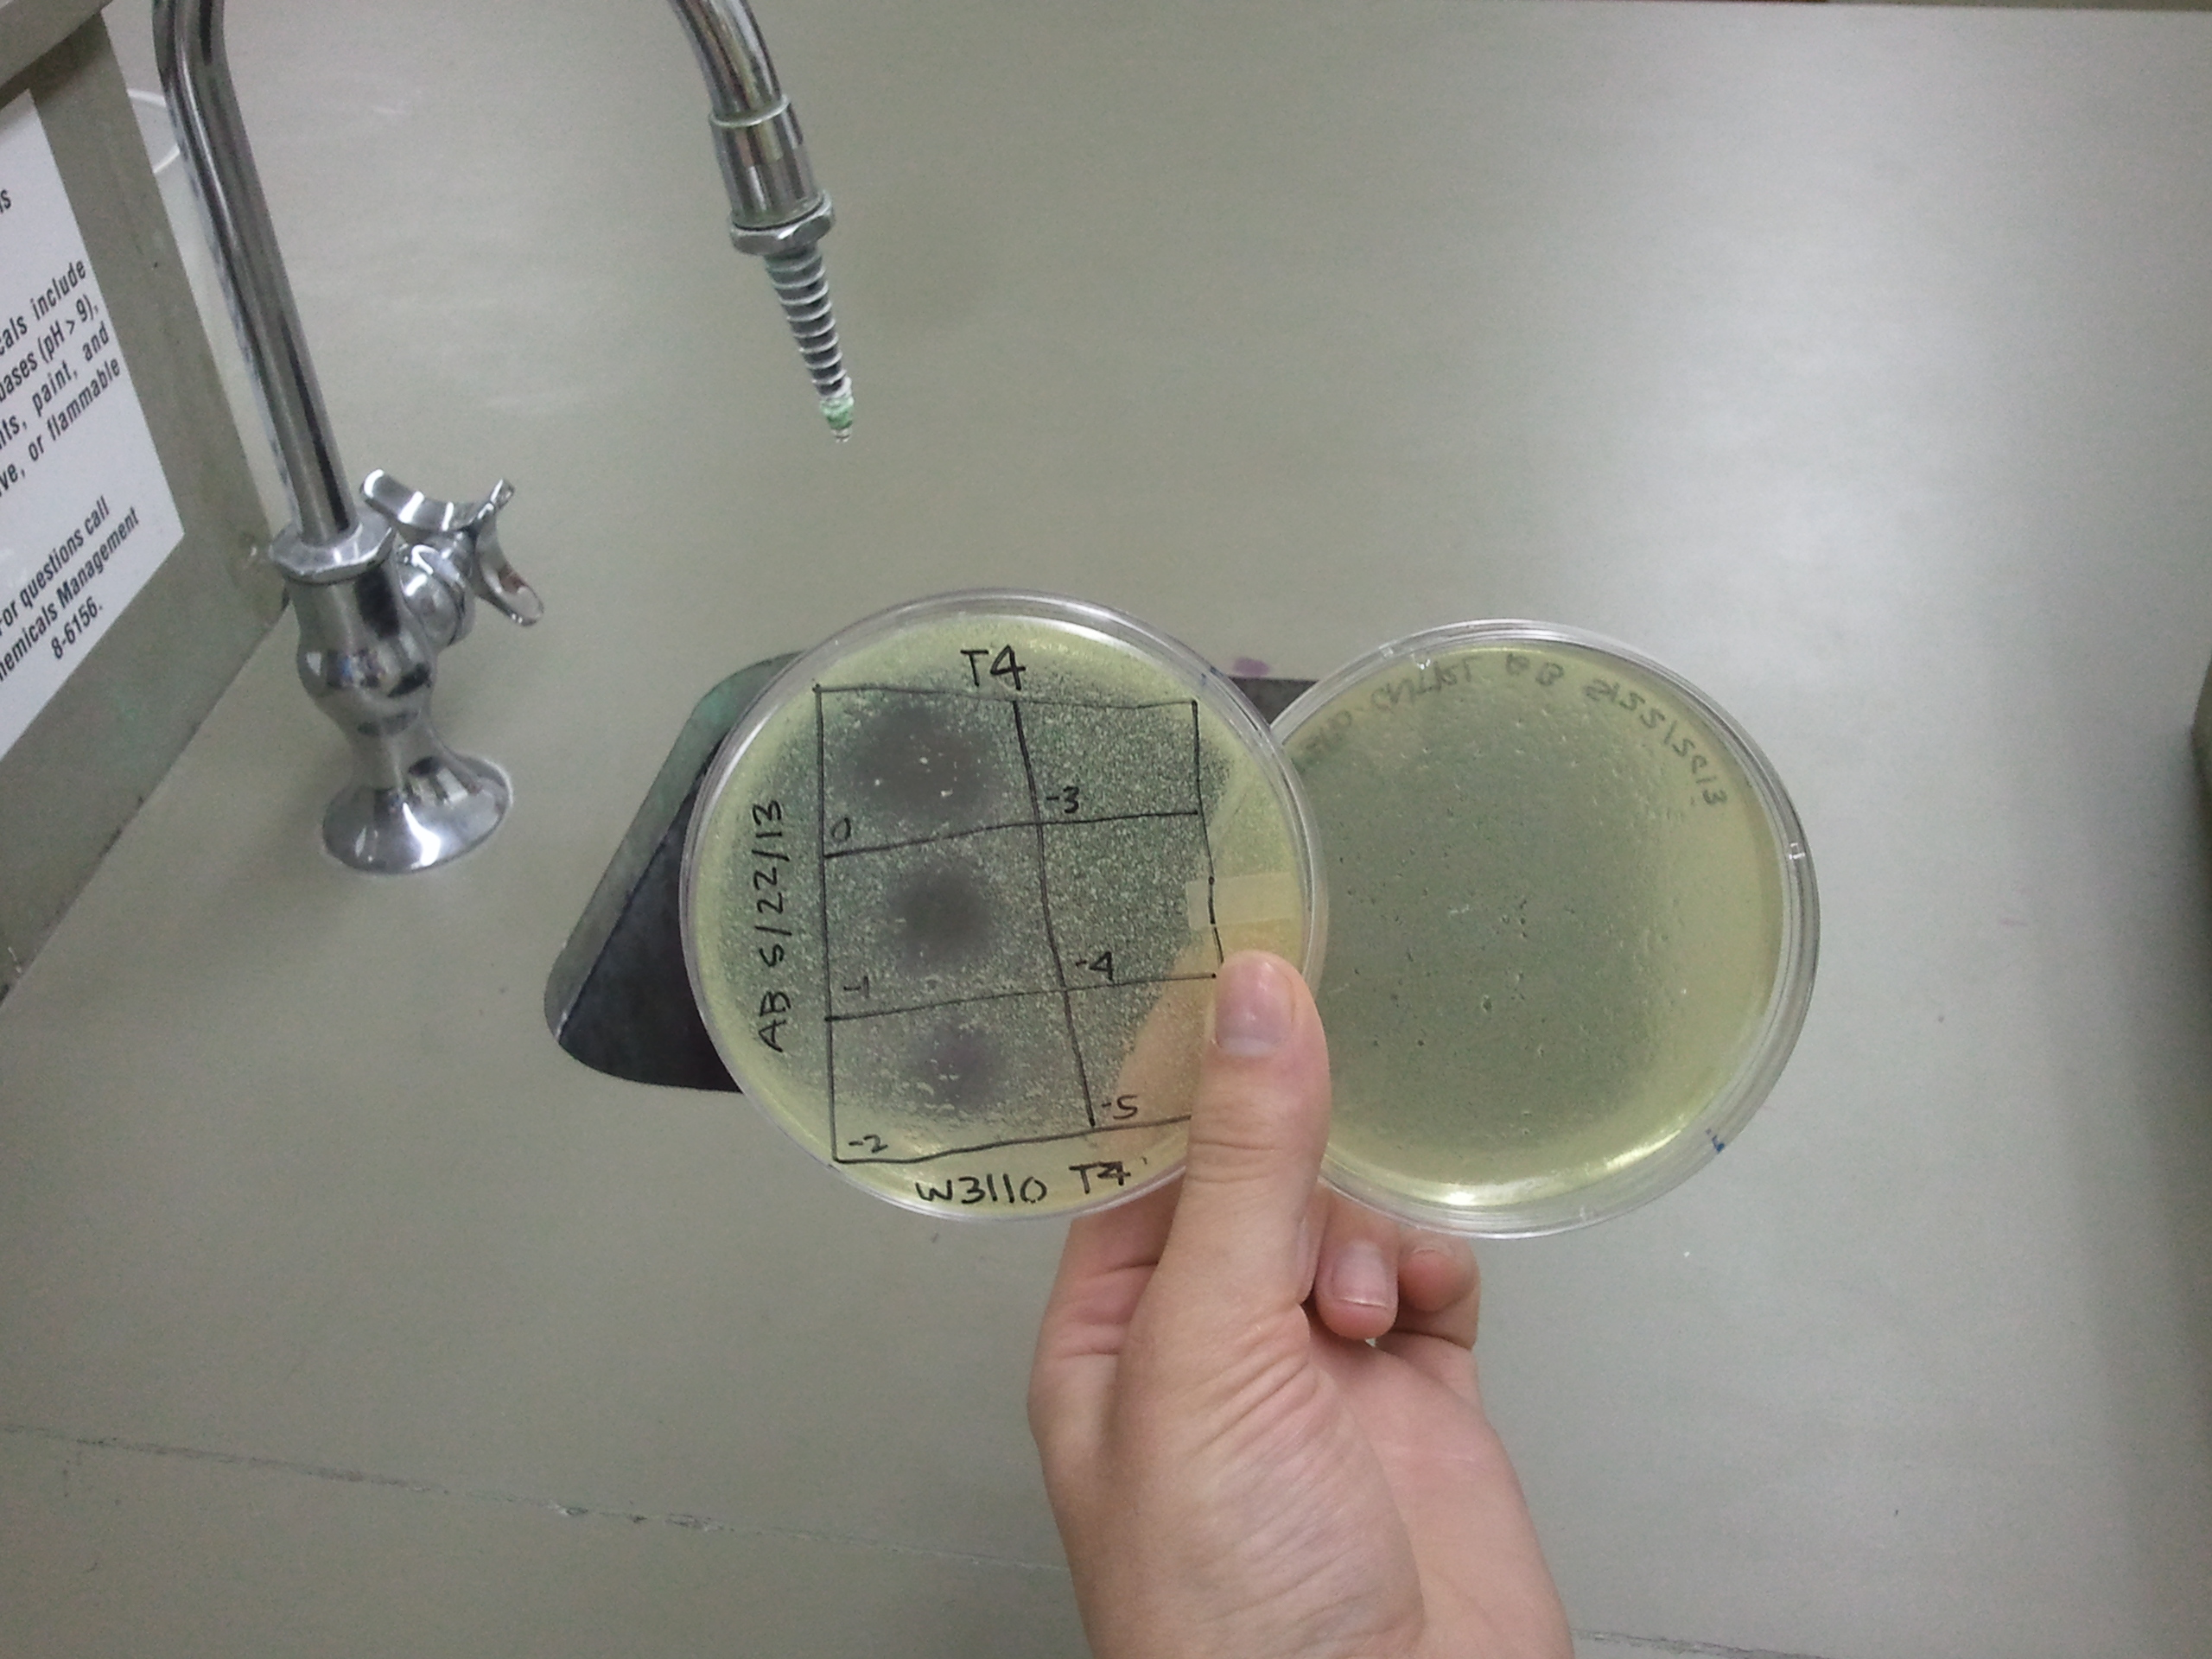 A phage plaques were found but with contamination.